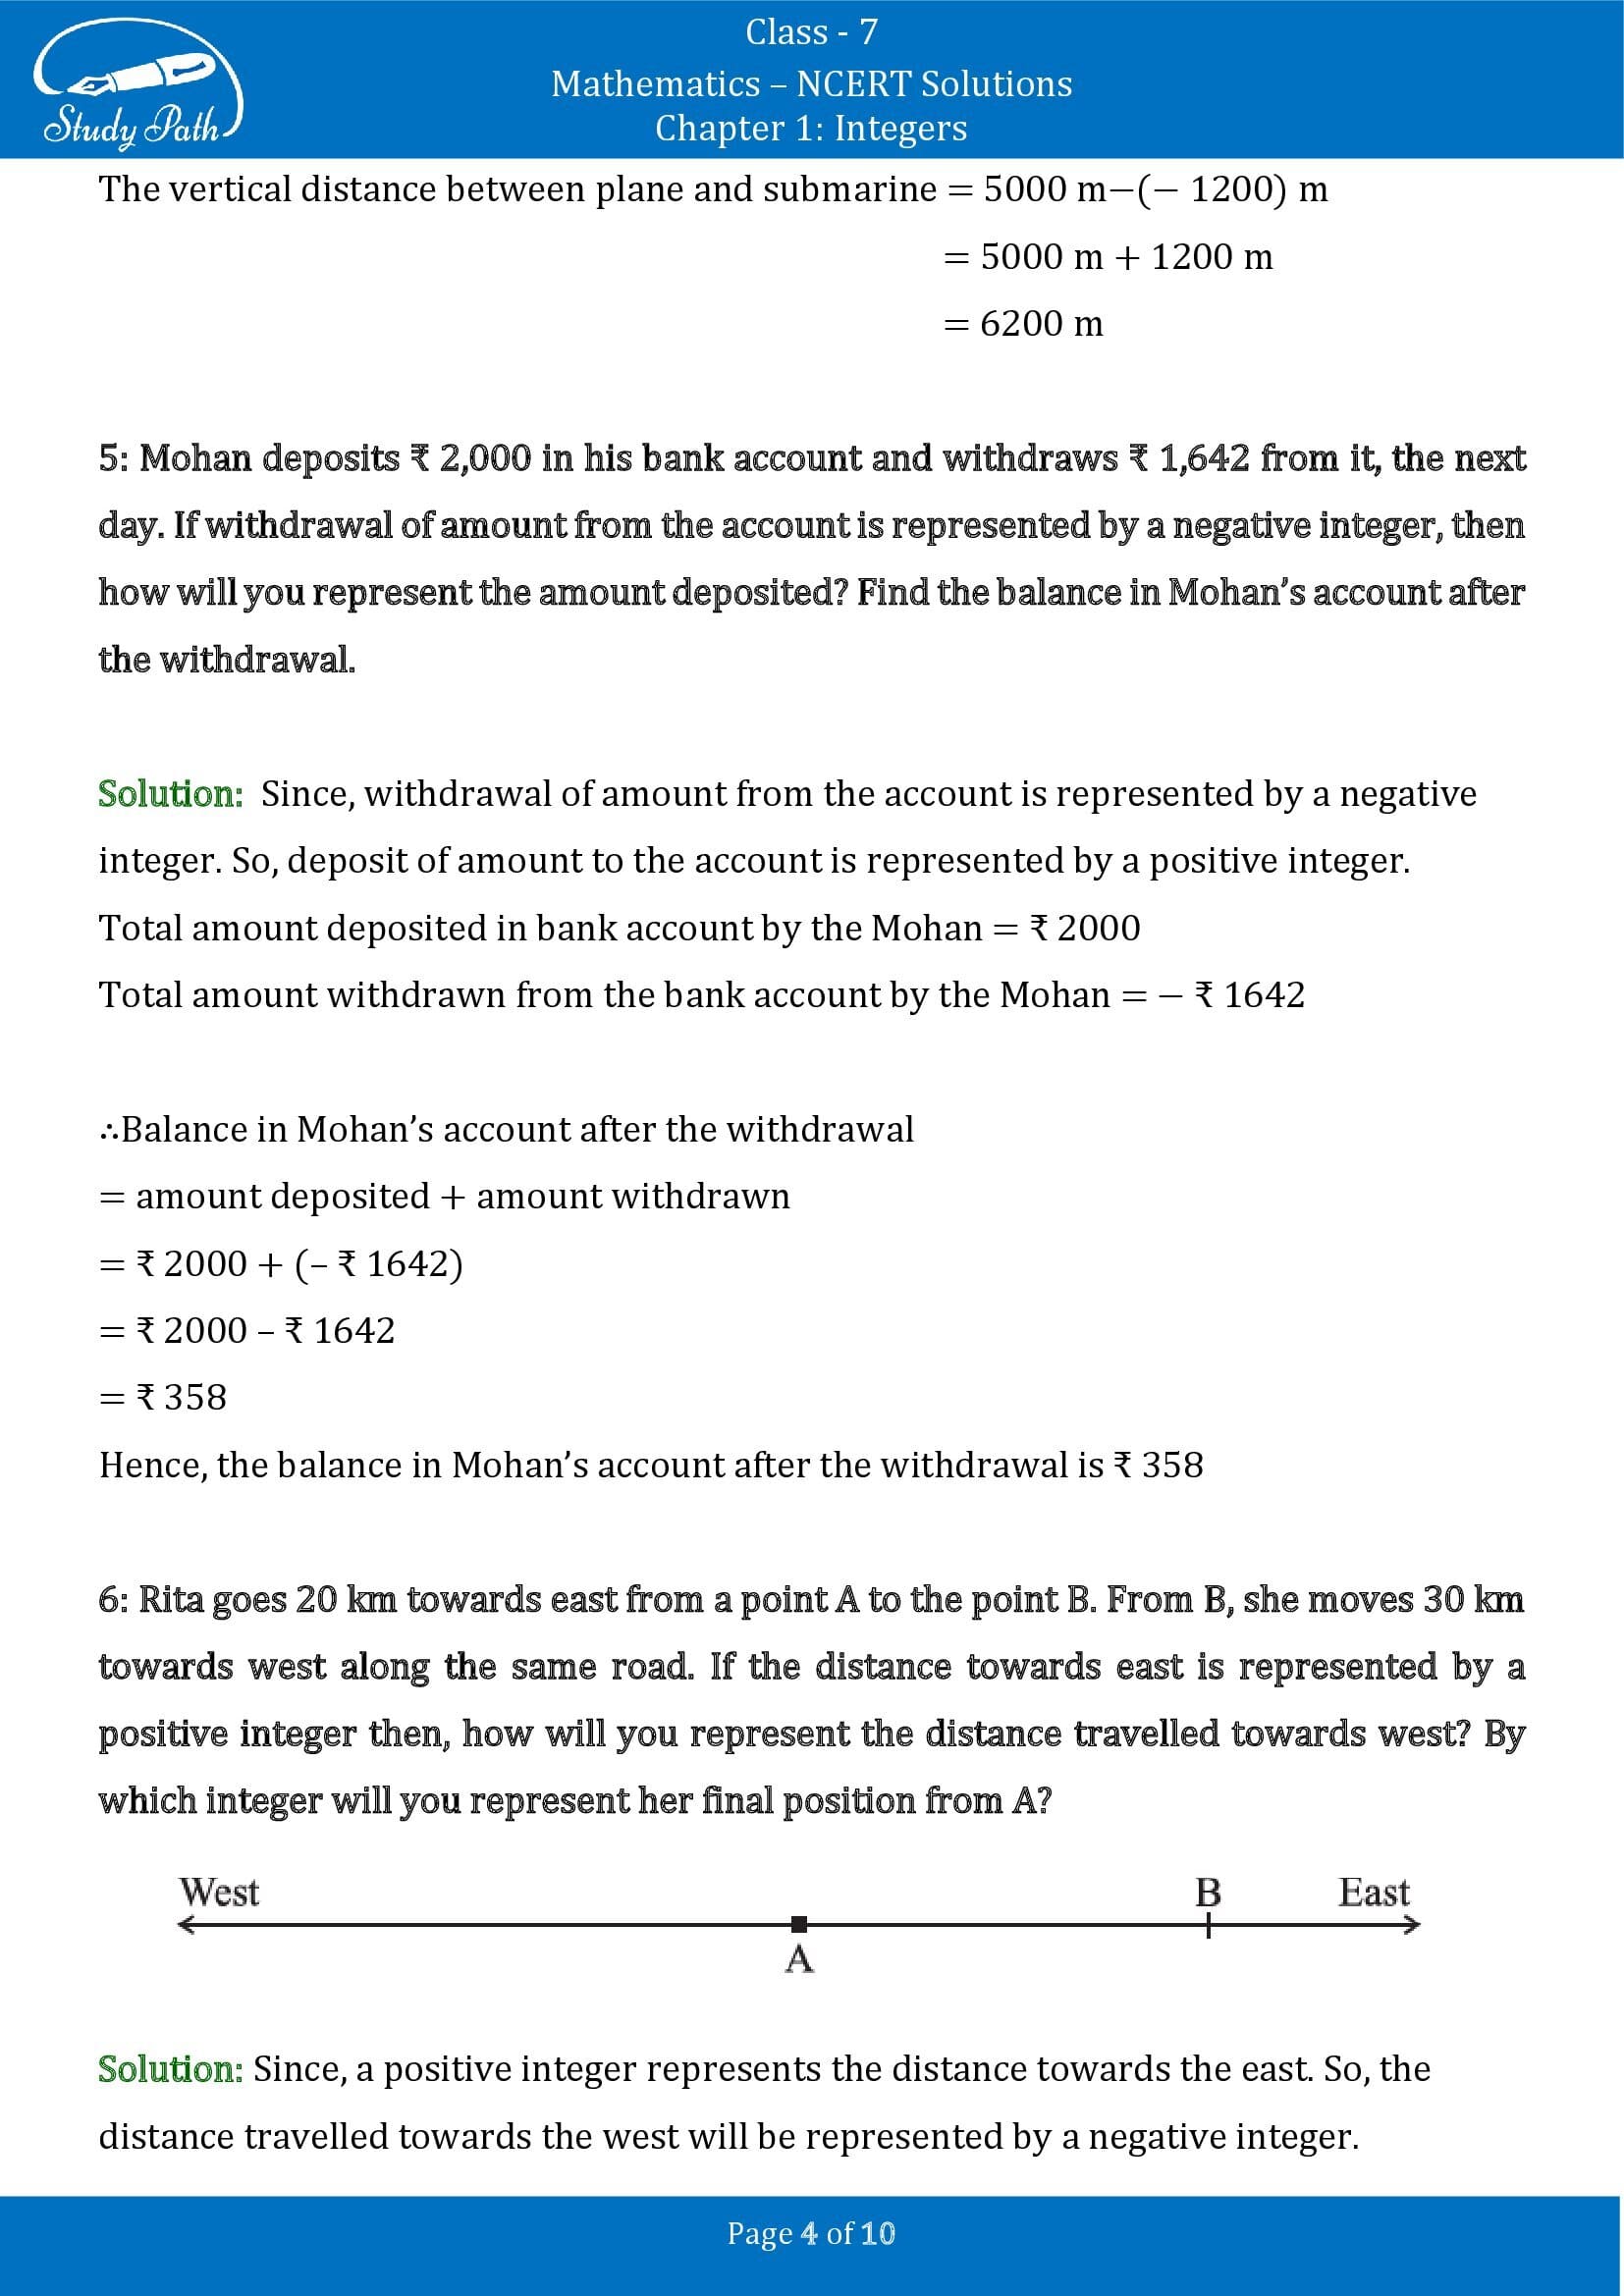 NCERT Solutions for Class 7 Maths Chapter 1 Integers Exercise 1.1 00004